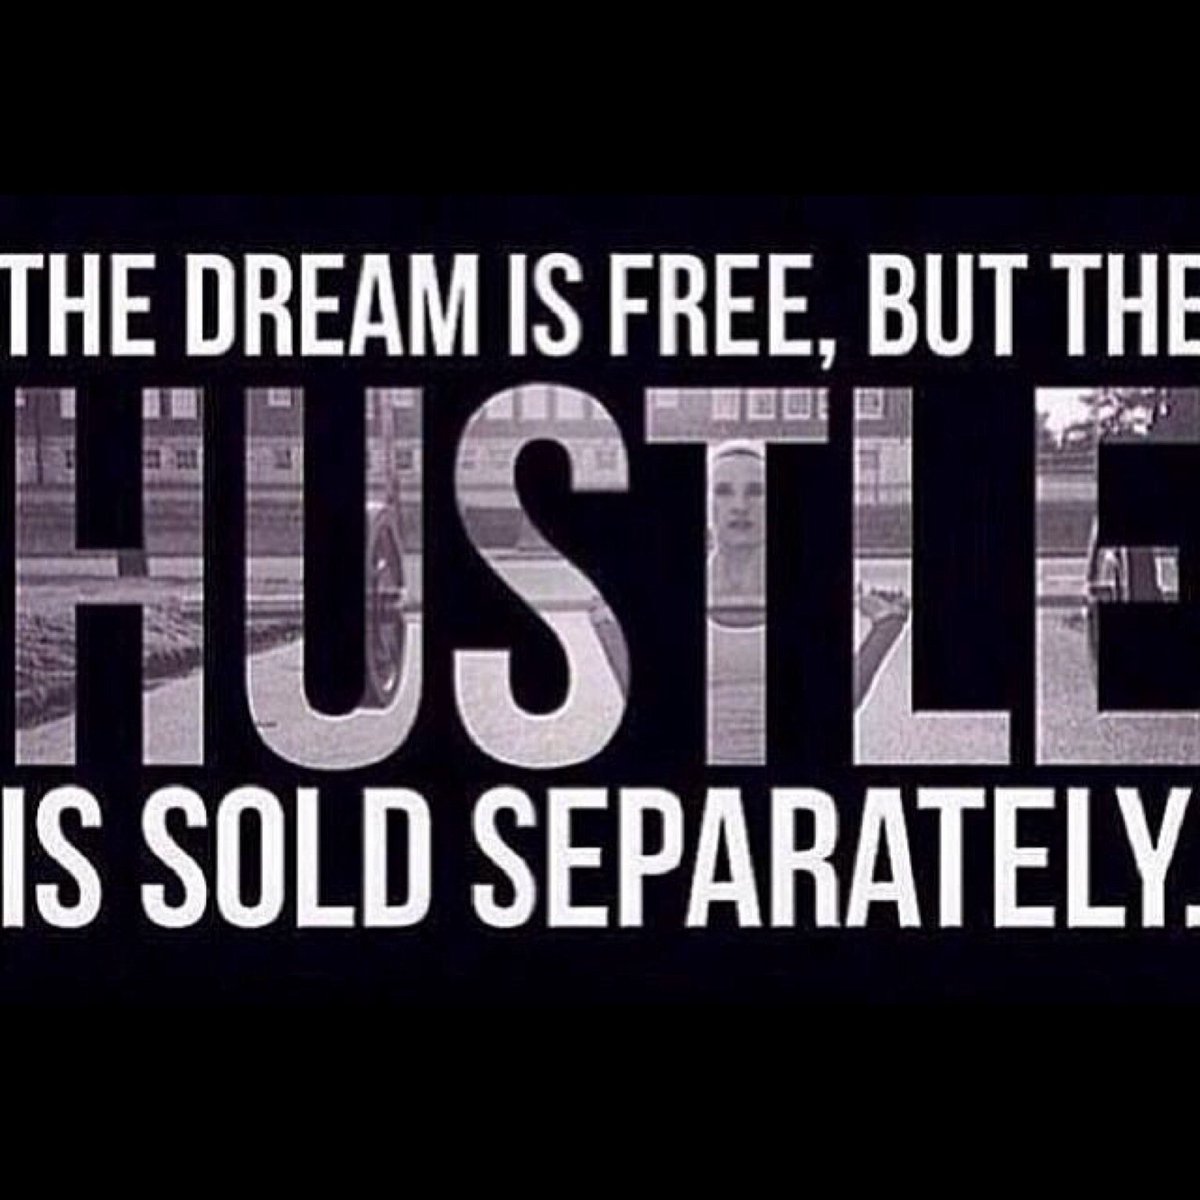 Good morning Twitter fam hope you good people have a productive and beneficial day.

Everybody want to be successful, but not all have the motivation and that want to that can't be stopped.

That's the part that ain't free.

You have to put in that work!
#CarpeDiem 
#HumpDayVibes